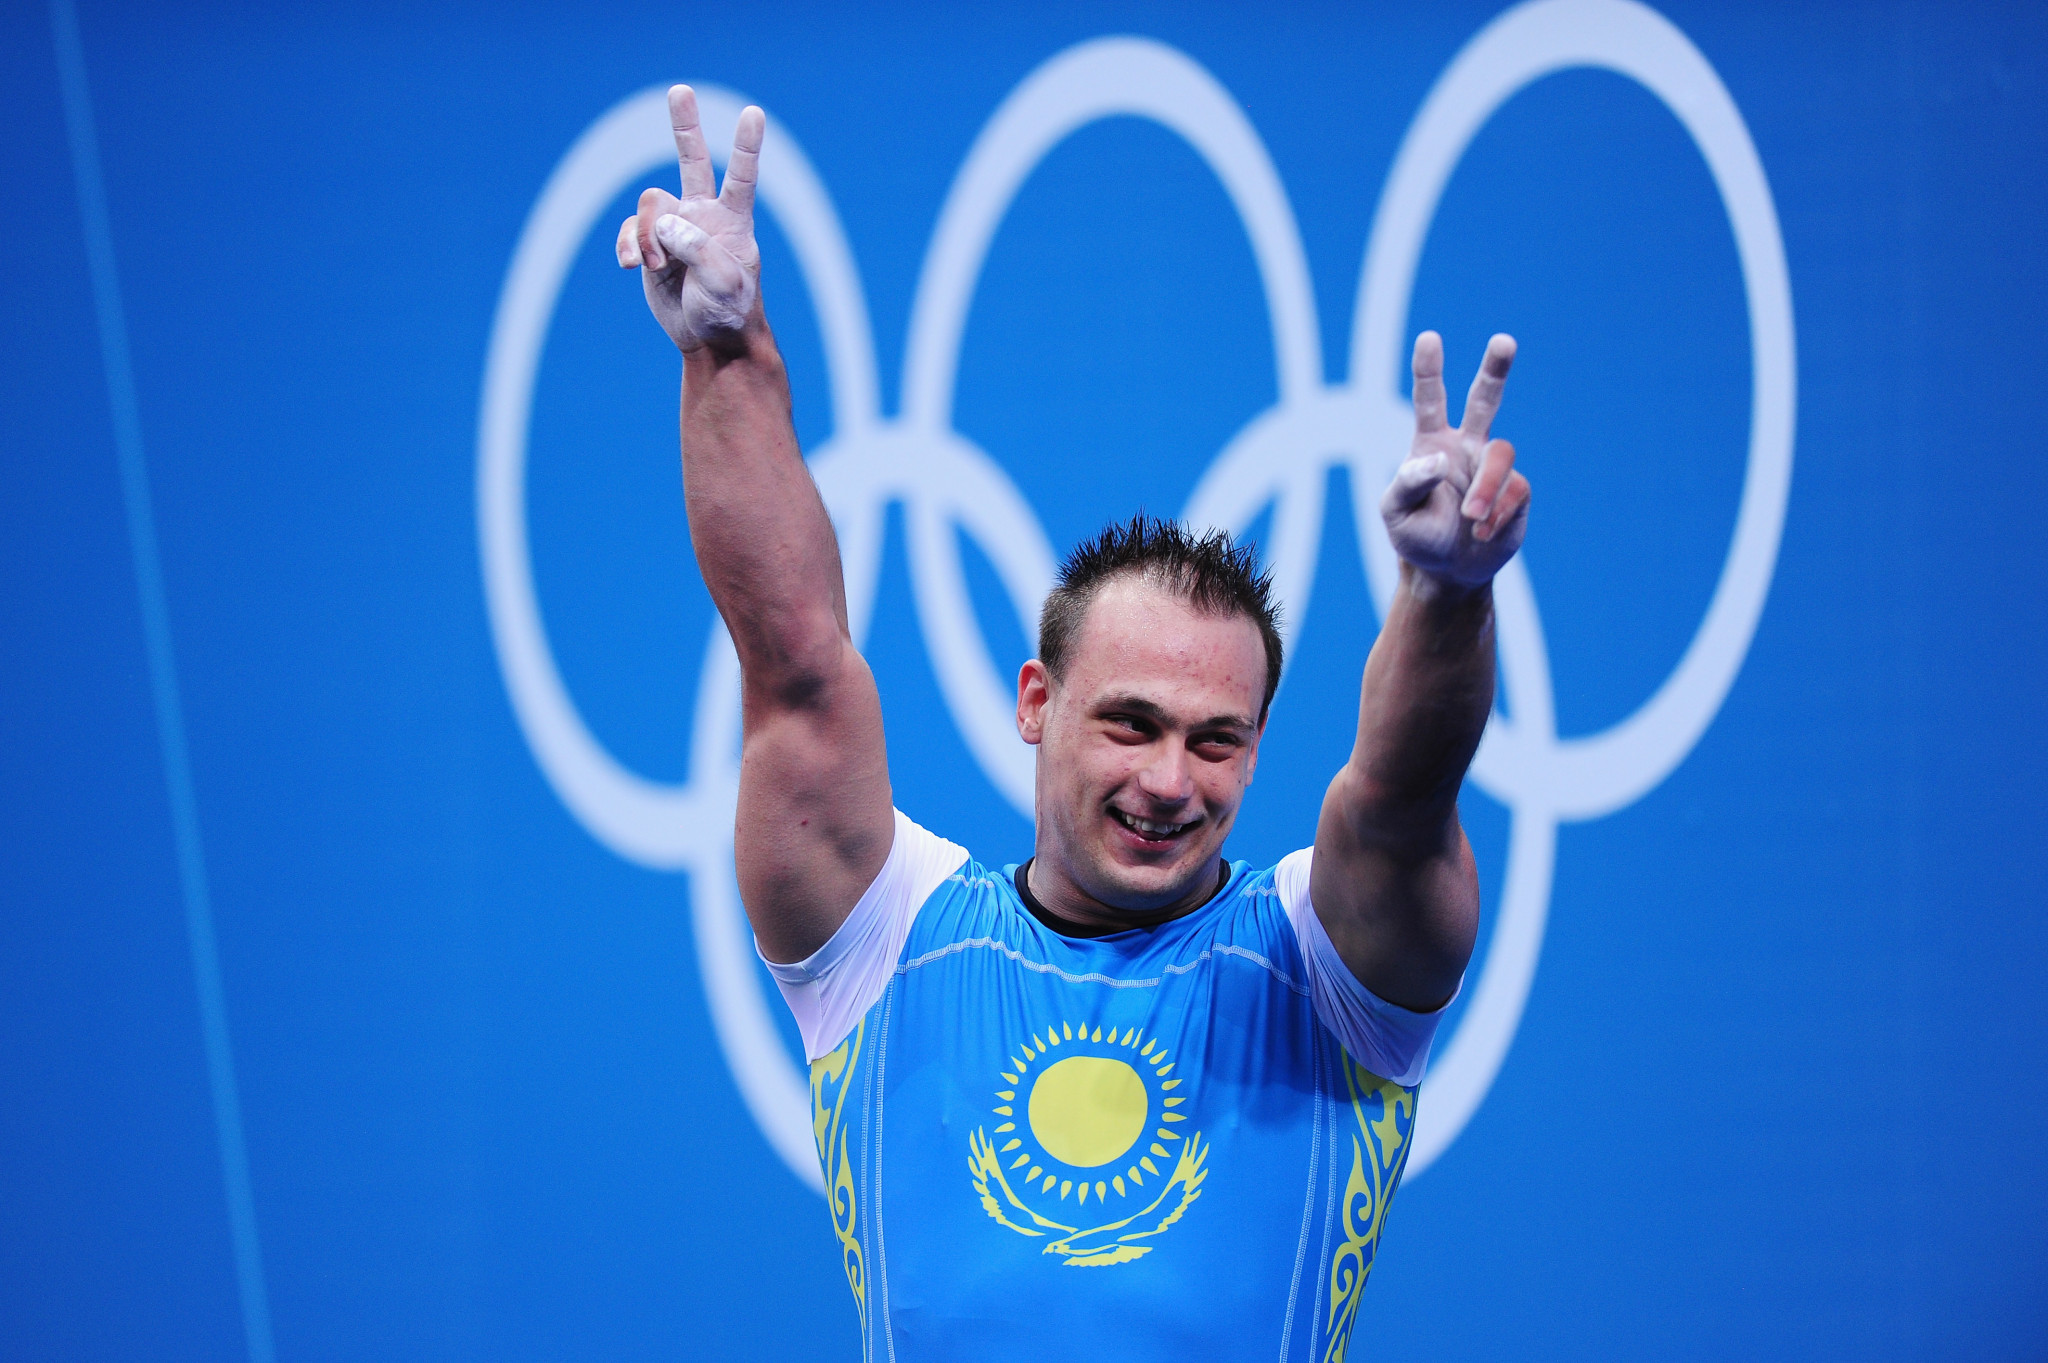 Relief for IWF as doper Ilyin withdraws from Kazakhstan weightlifting election